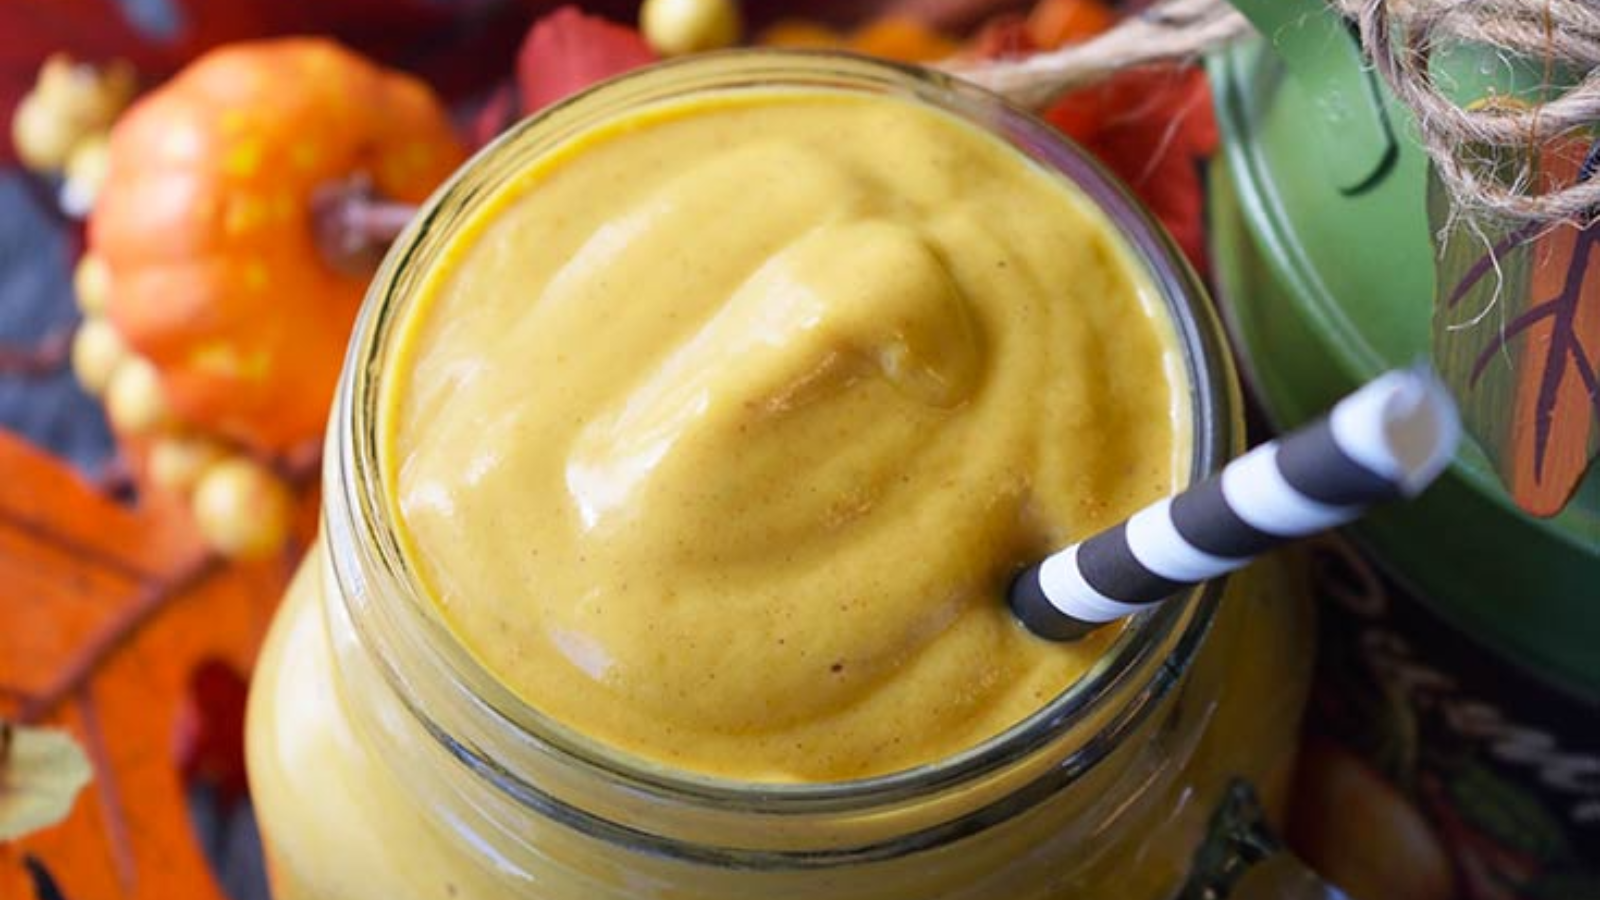 11 Breakfast Smoothies For A Refreshing Fall Morning